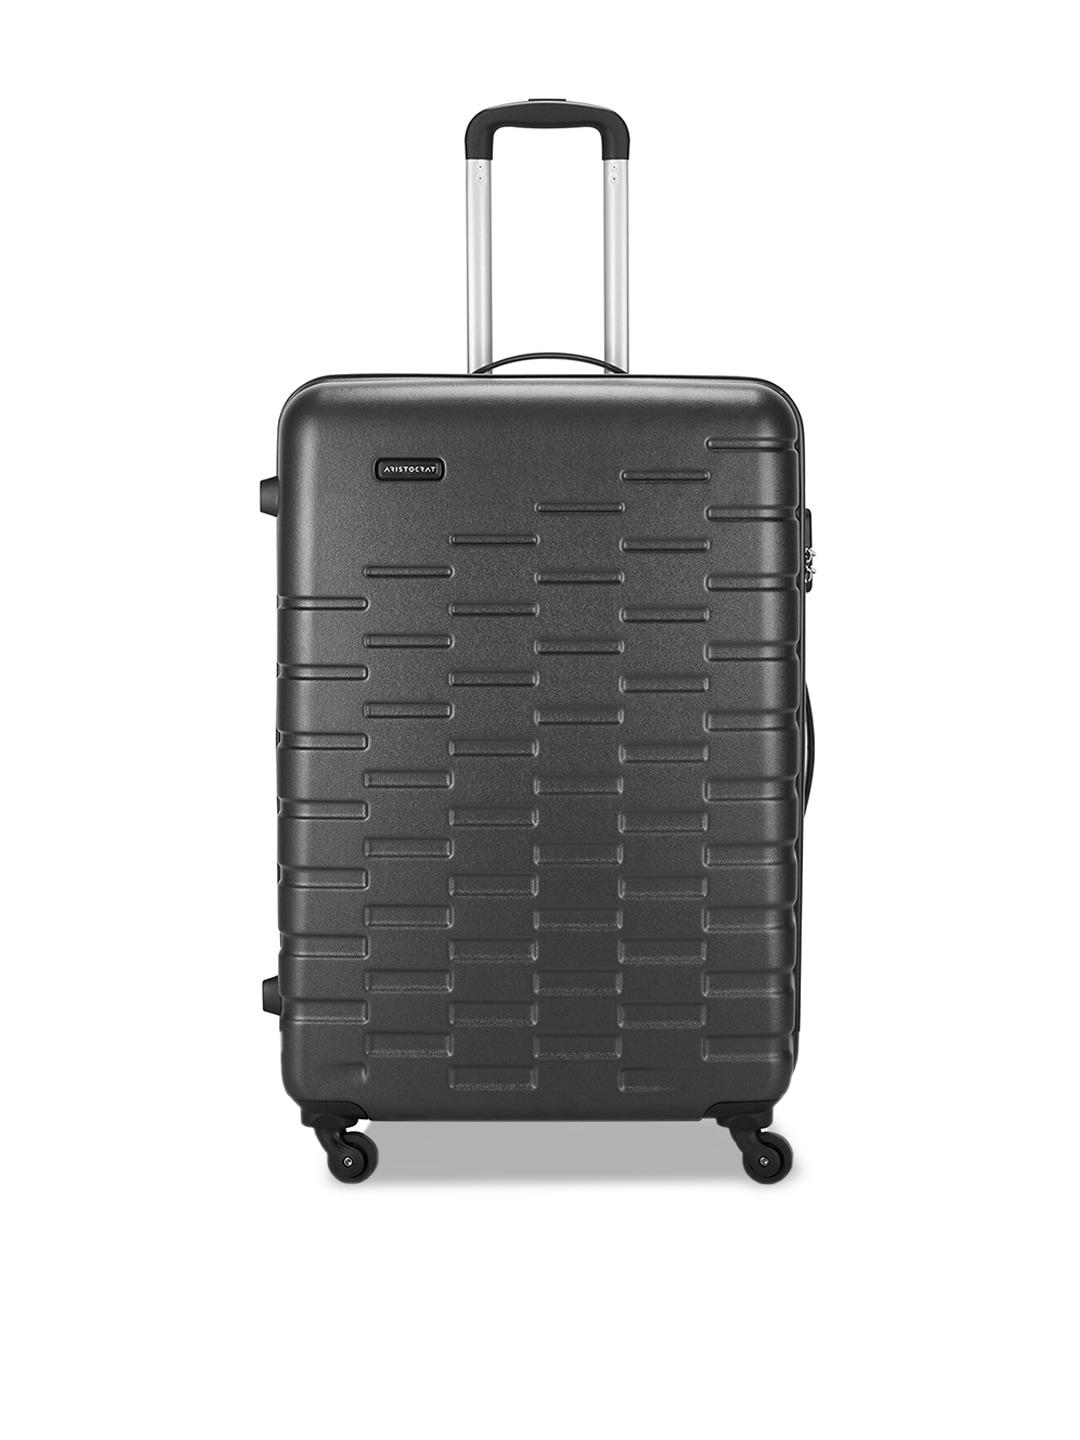 Aristocrat Textured Water Resistant Hard-Sided Large Trolley Suitcase Bag